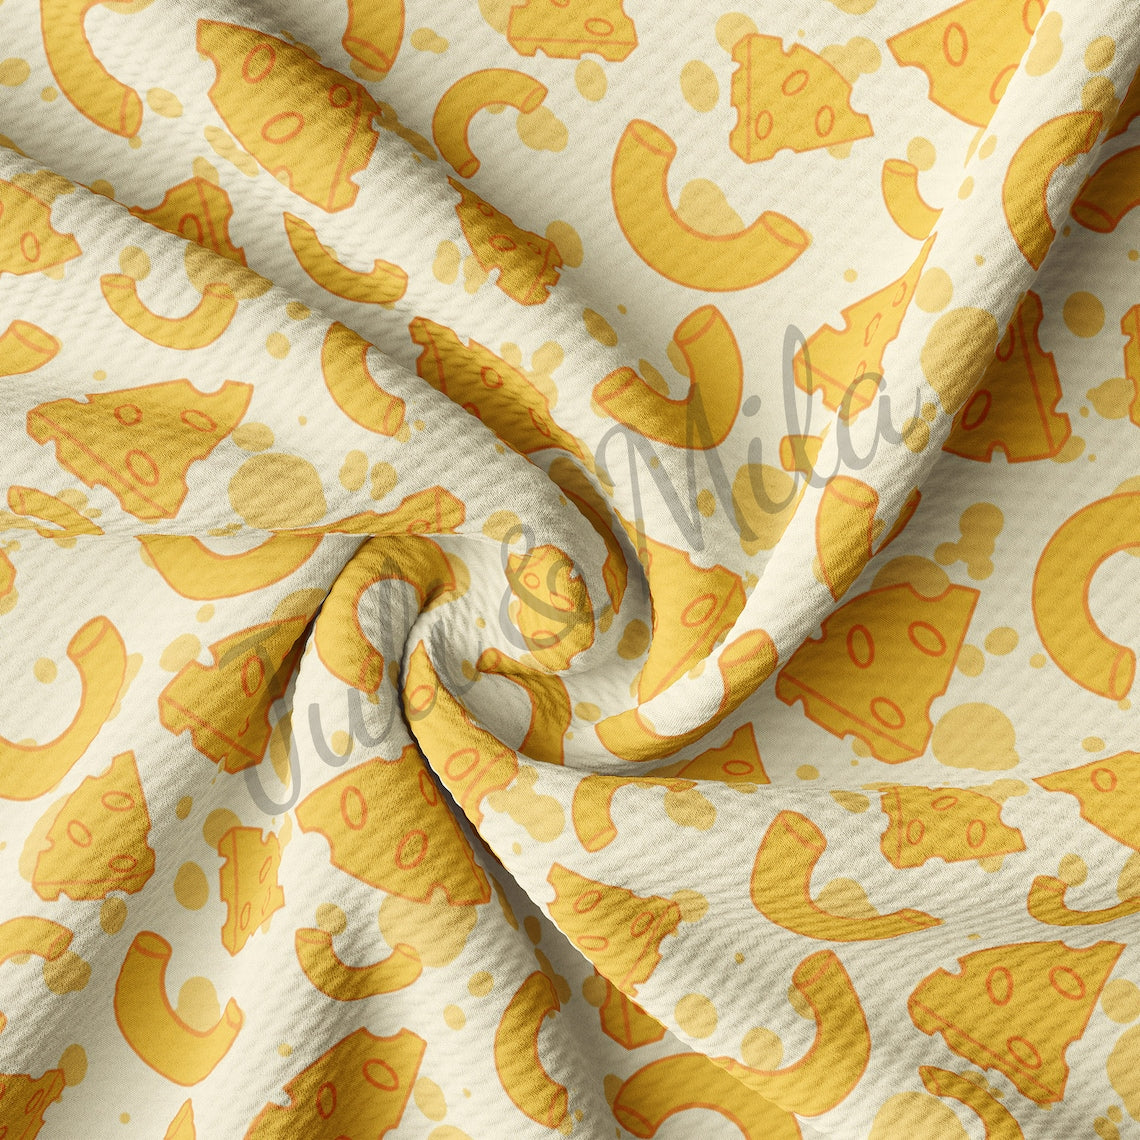 Limited Edition Patterned Discreetly Neat Blanket